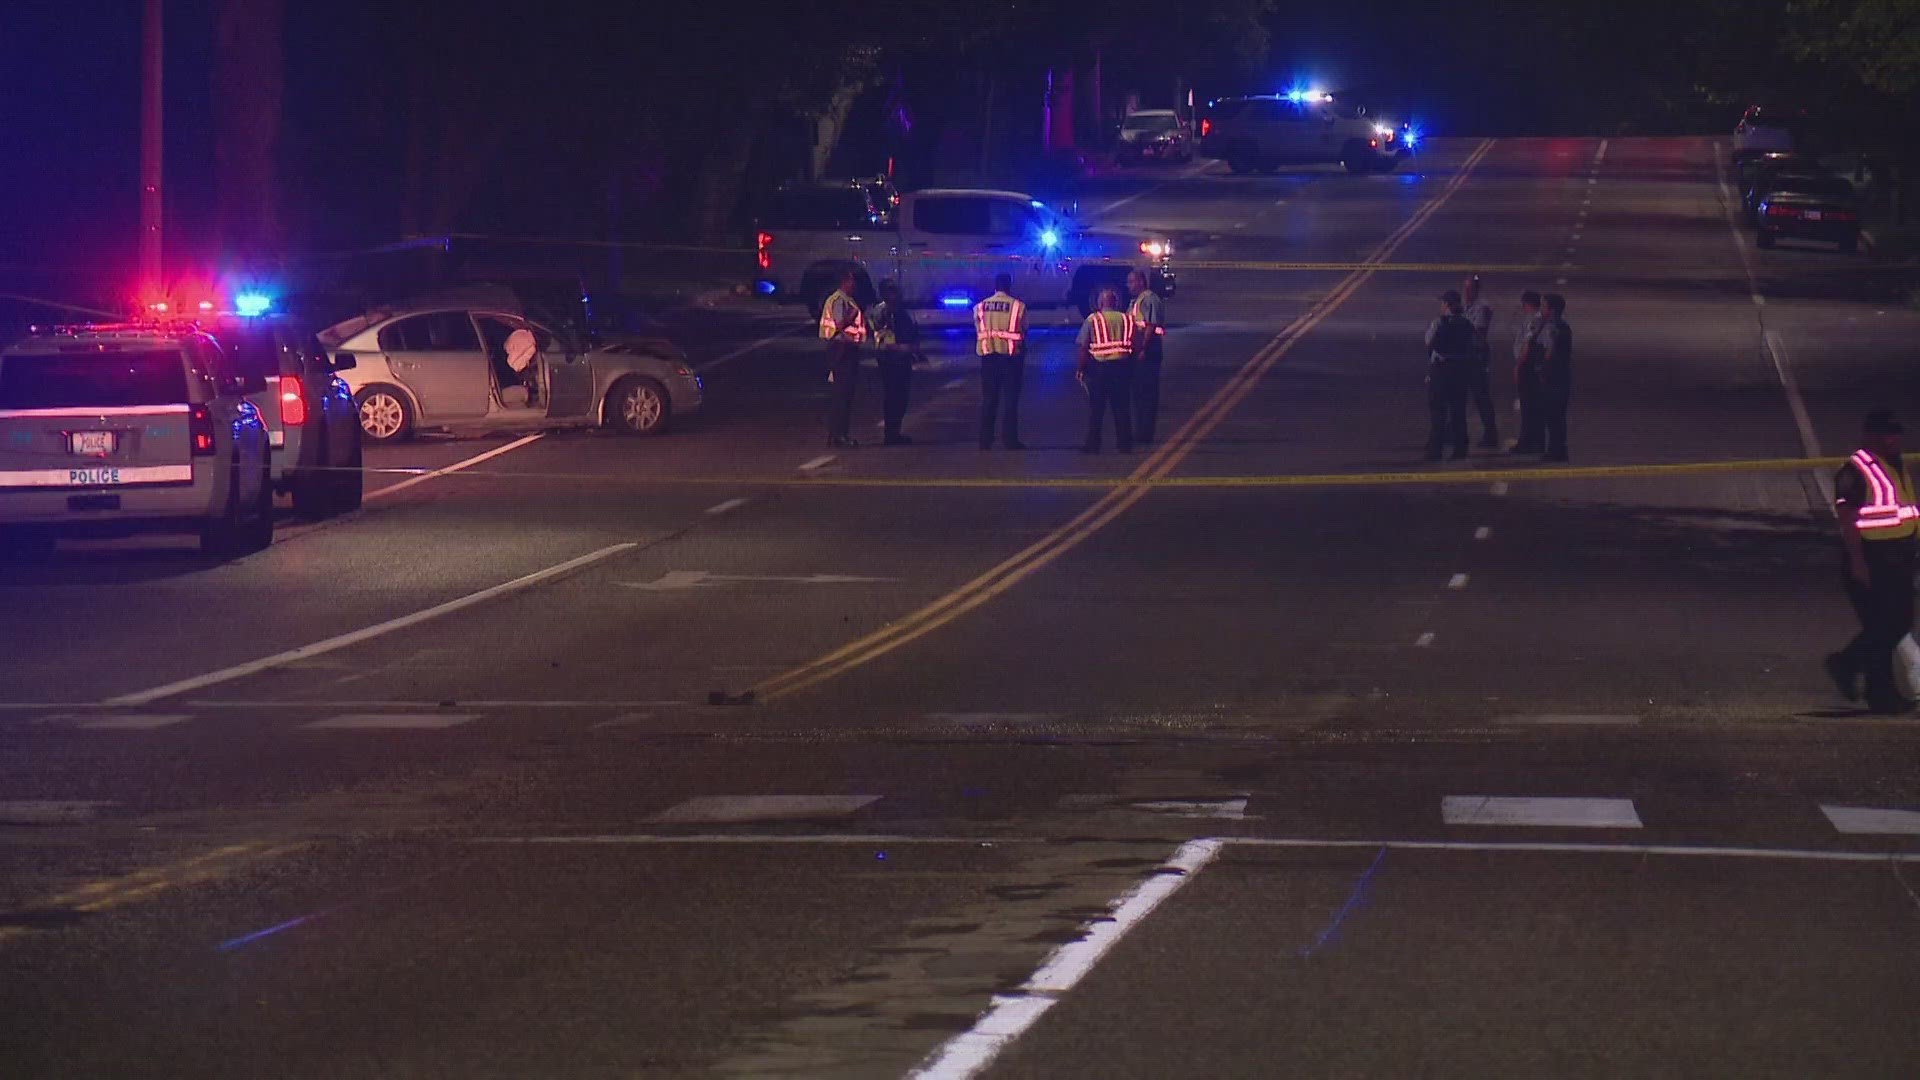 Two people were killed in separate incidents on Goodfellow Boulevard early Monday morning. One person was fatally shot, and another died in a crash.